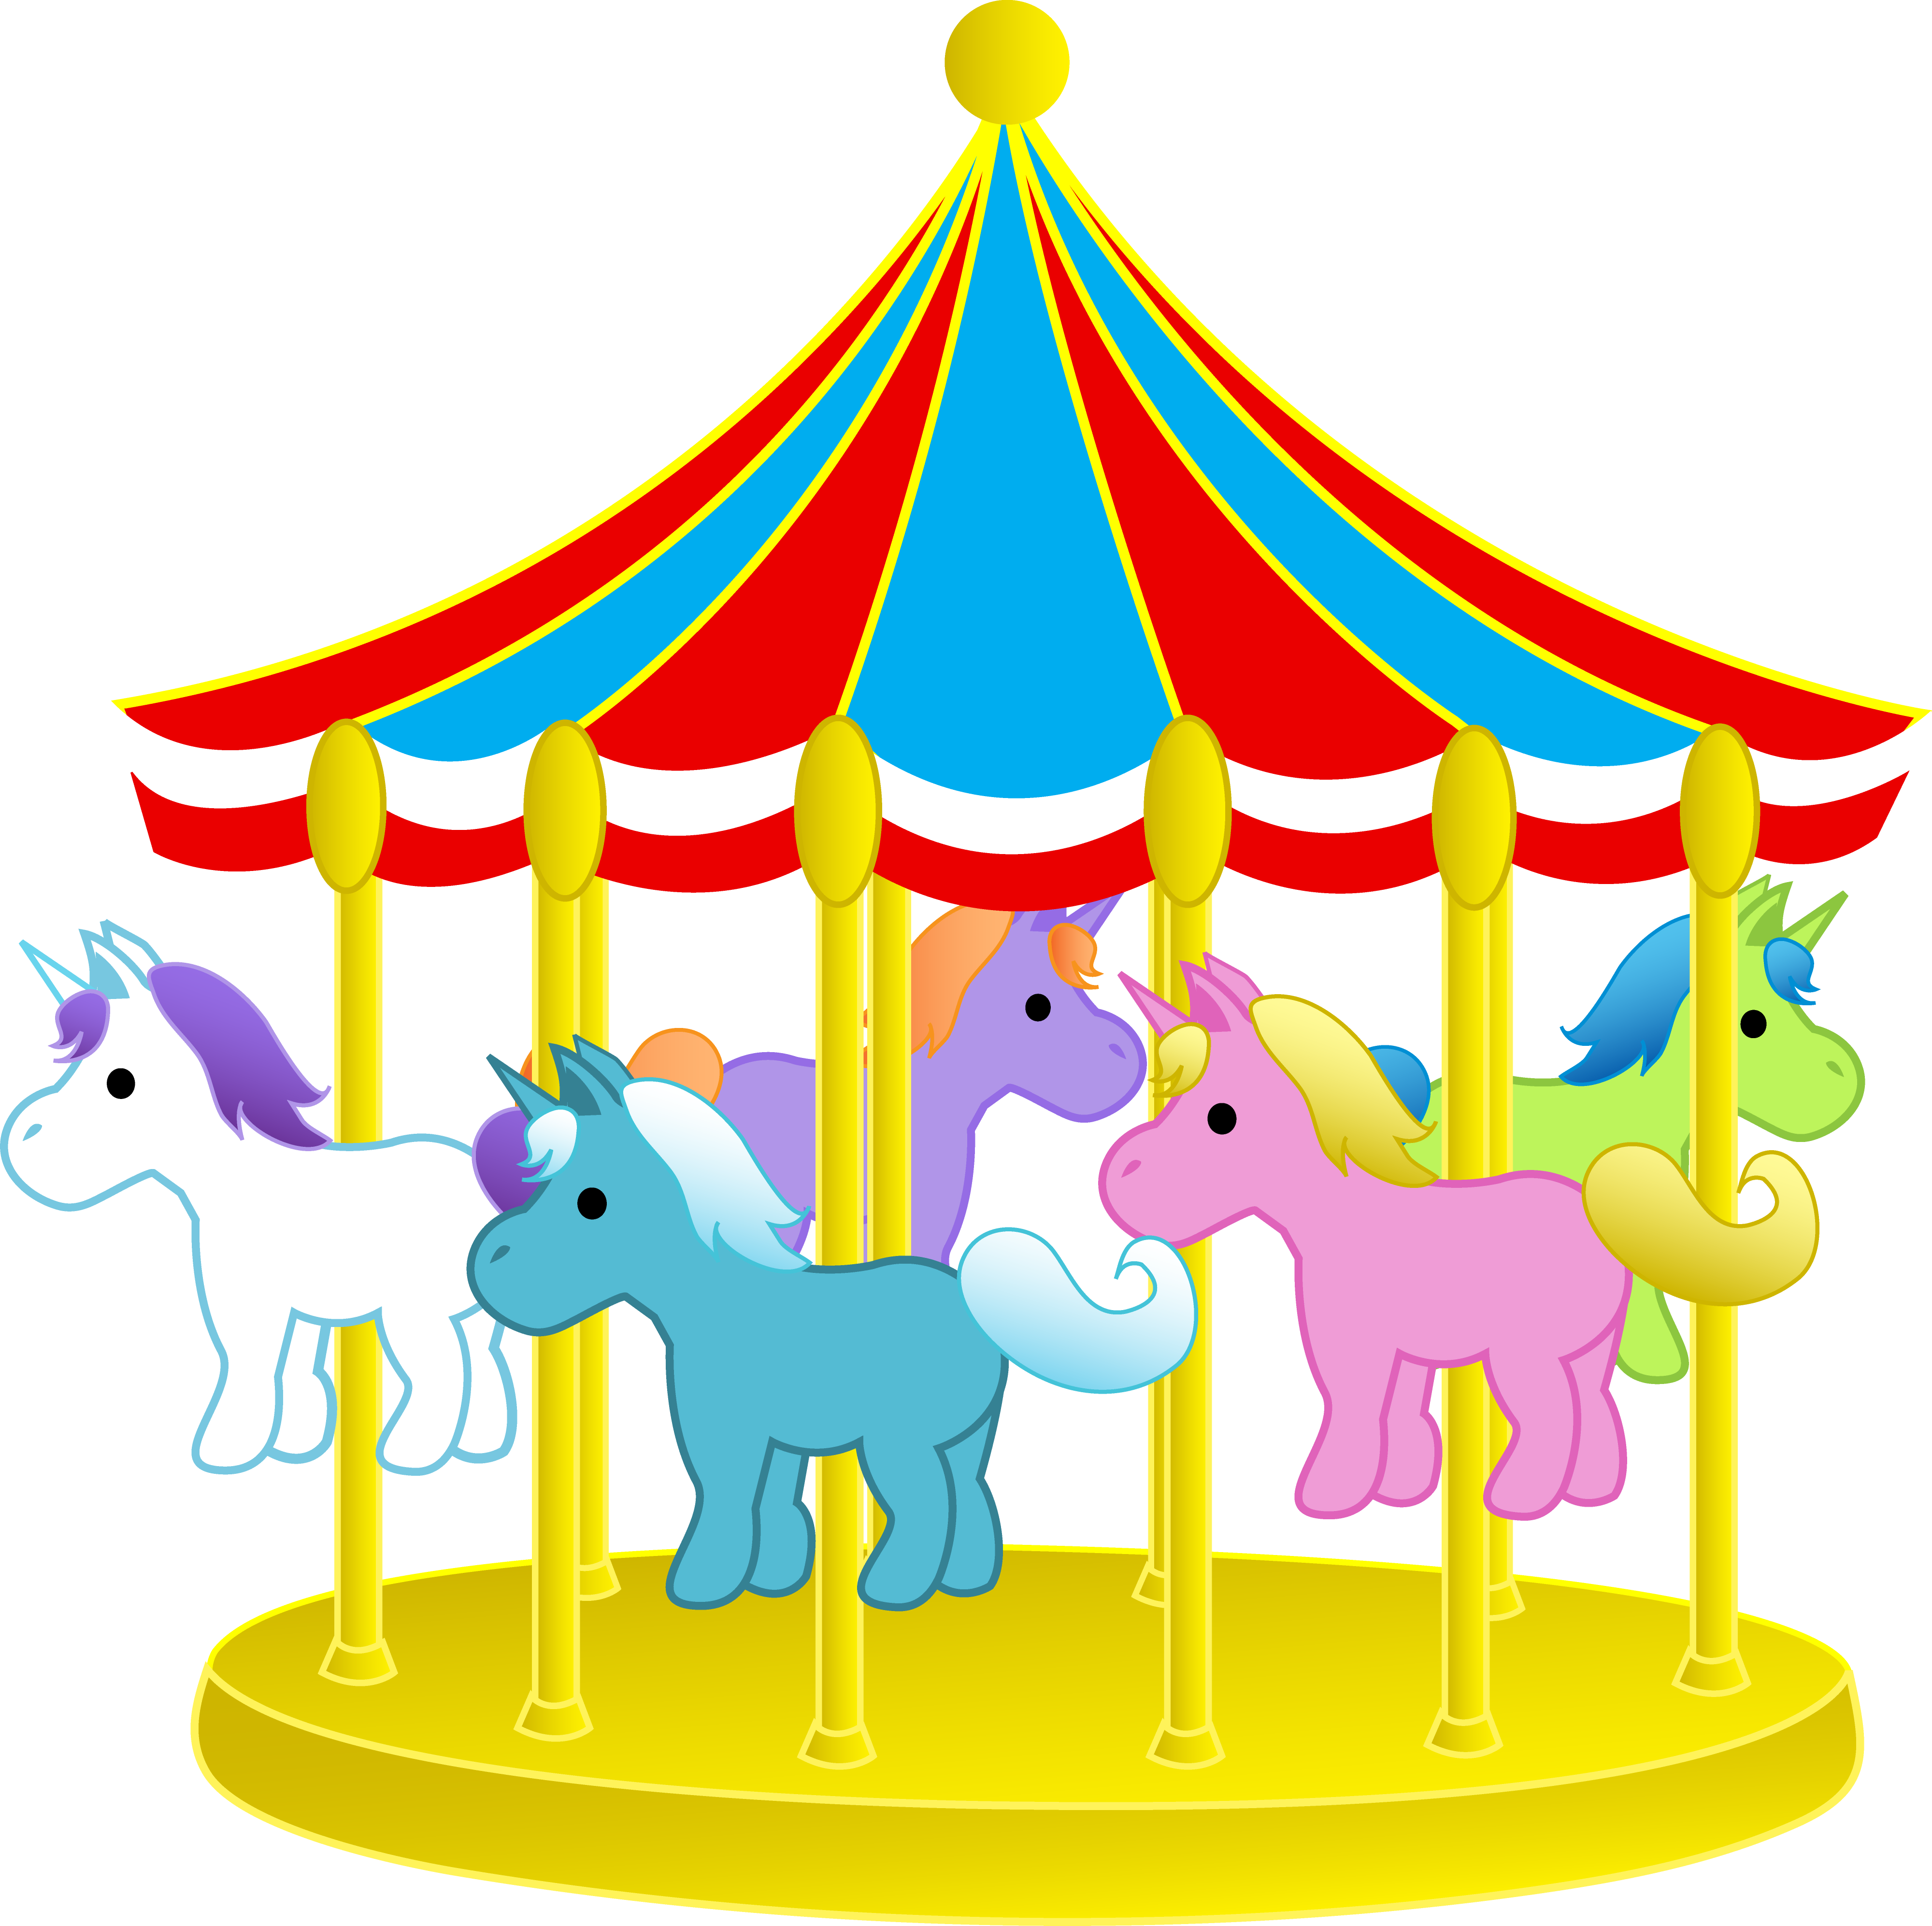 Cute Carnival Carousel With Ponies - Free Clip Art